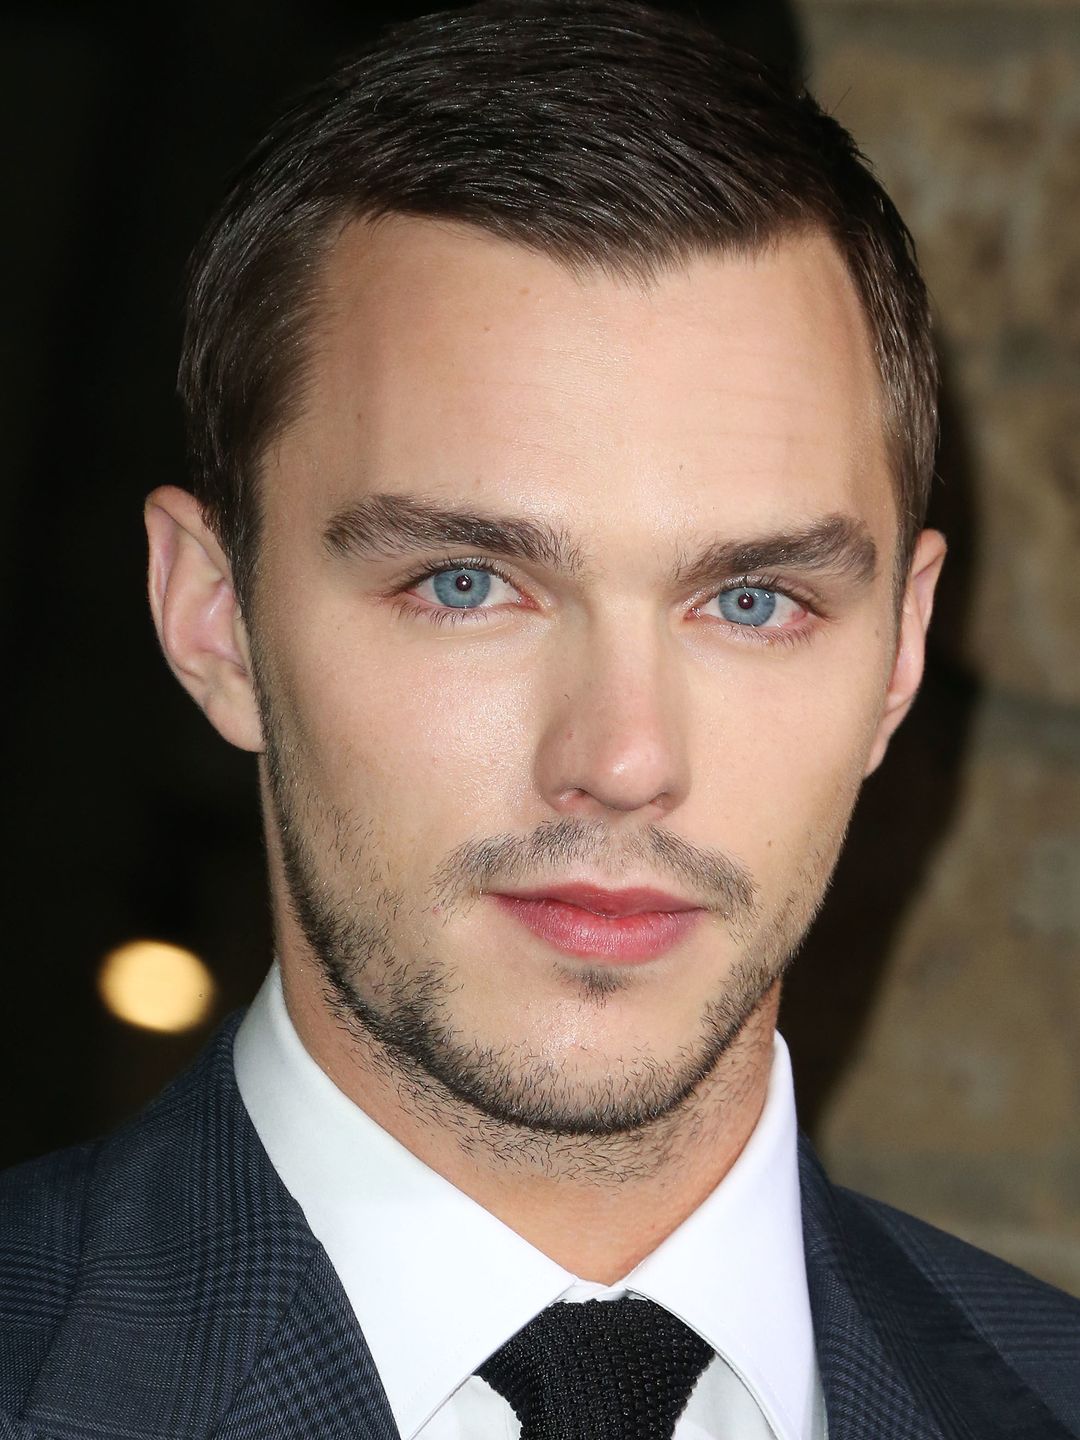 Nicholas Hoult who is his father